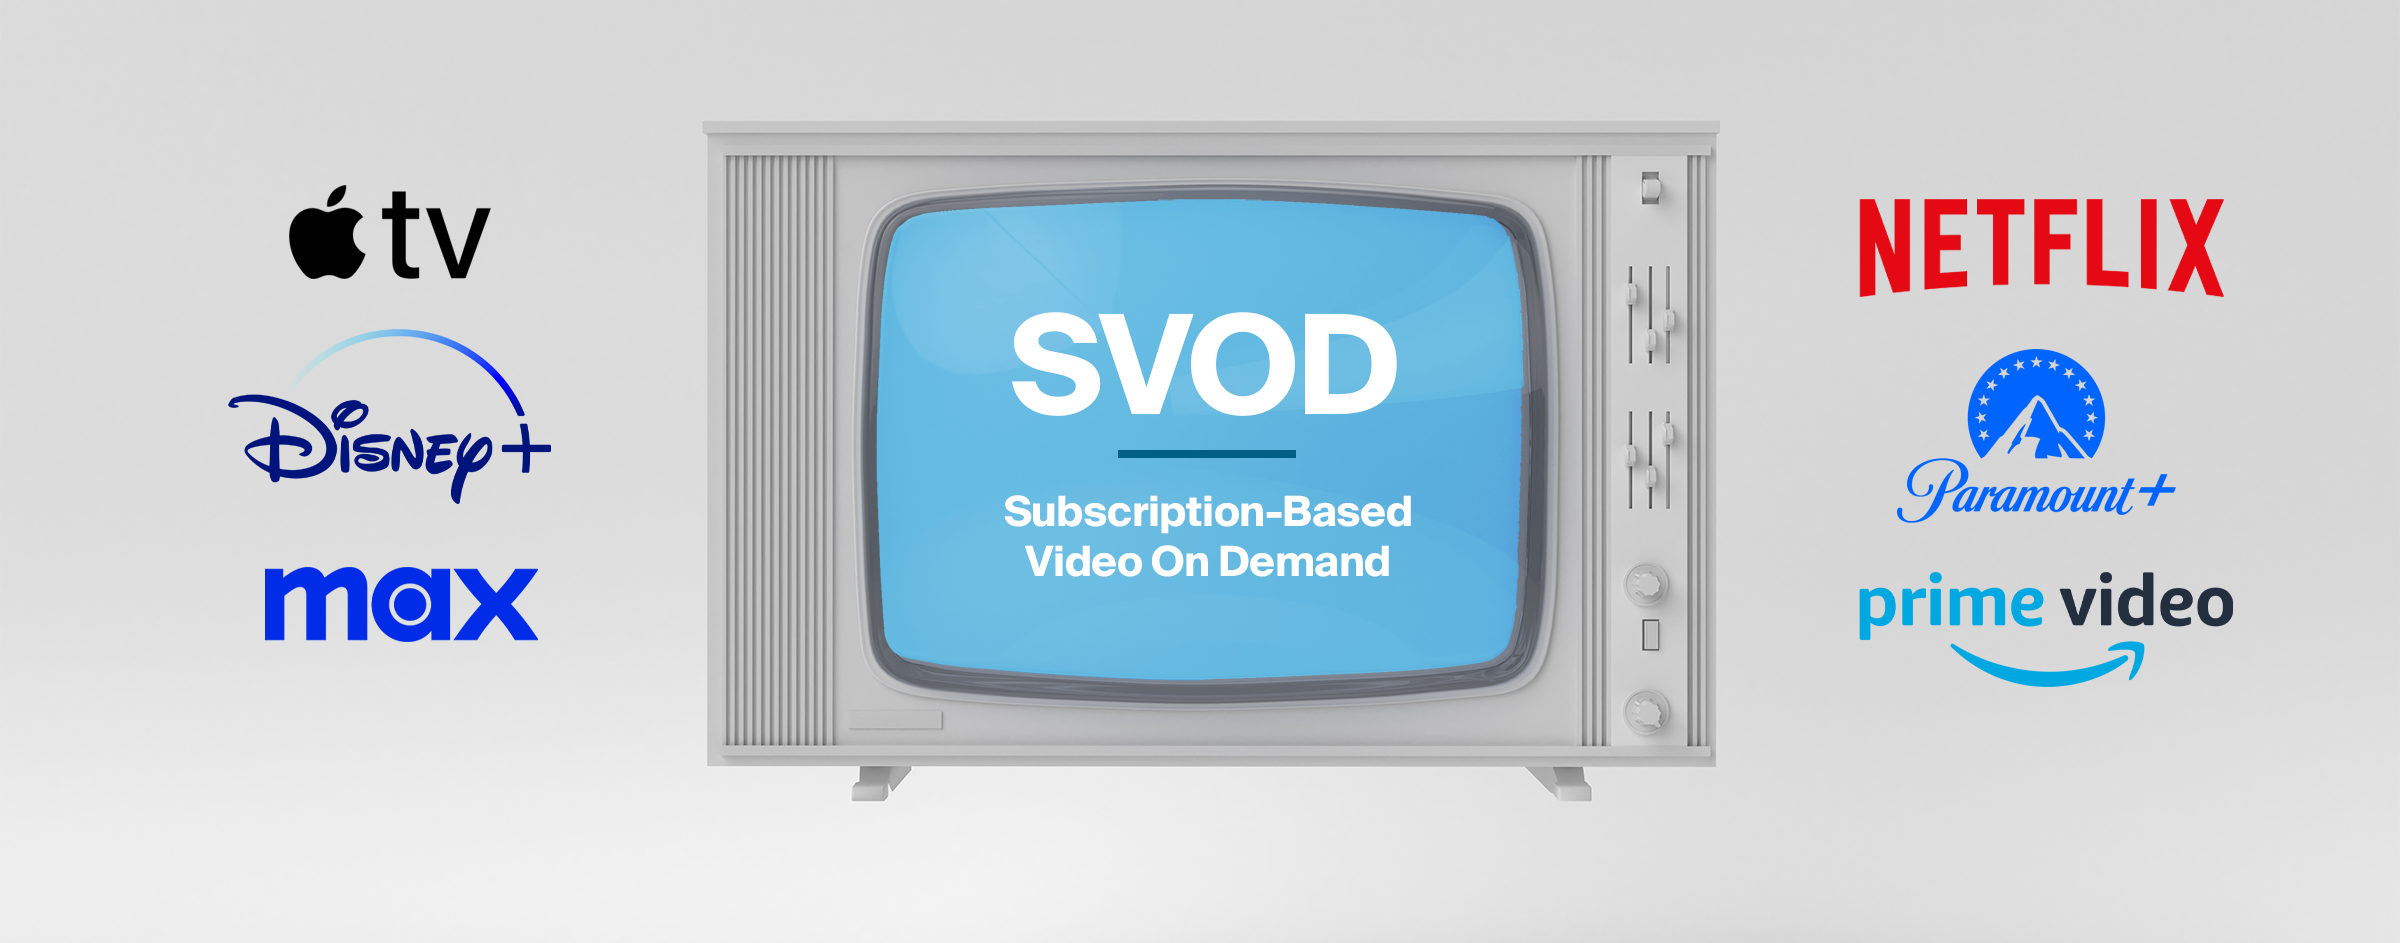 svod -subscription based video on demand